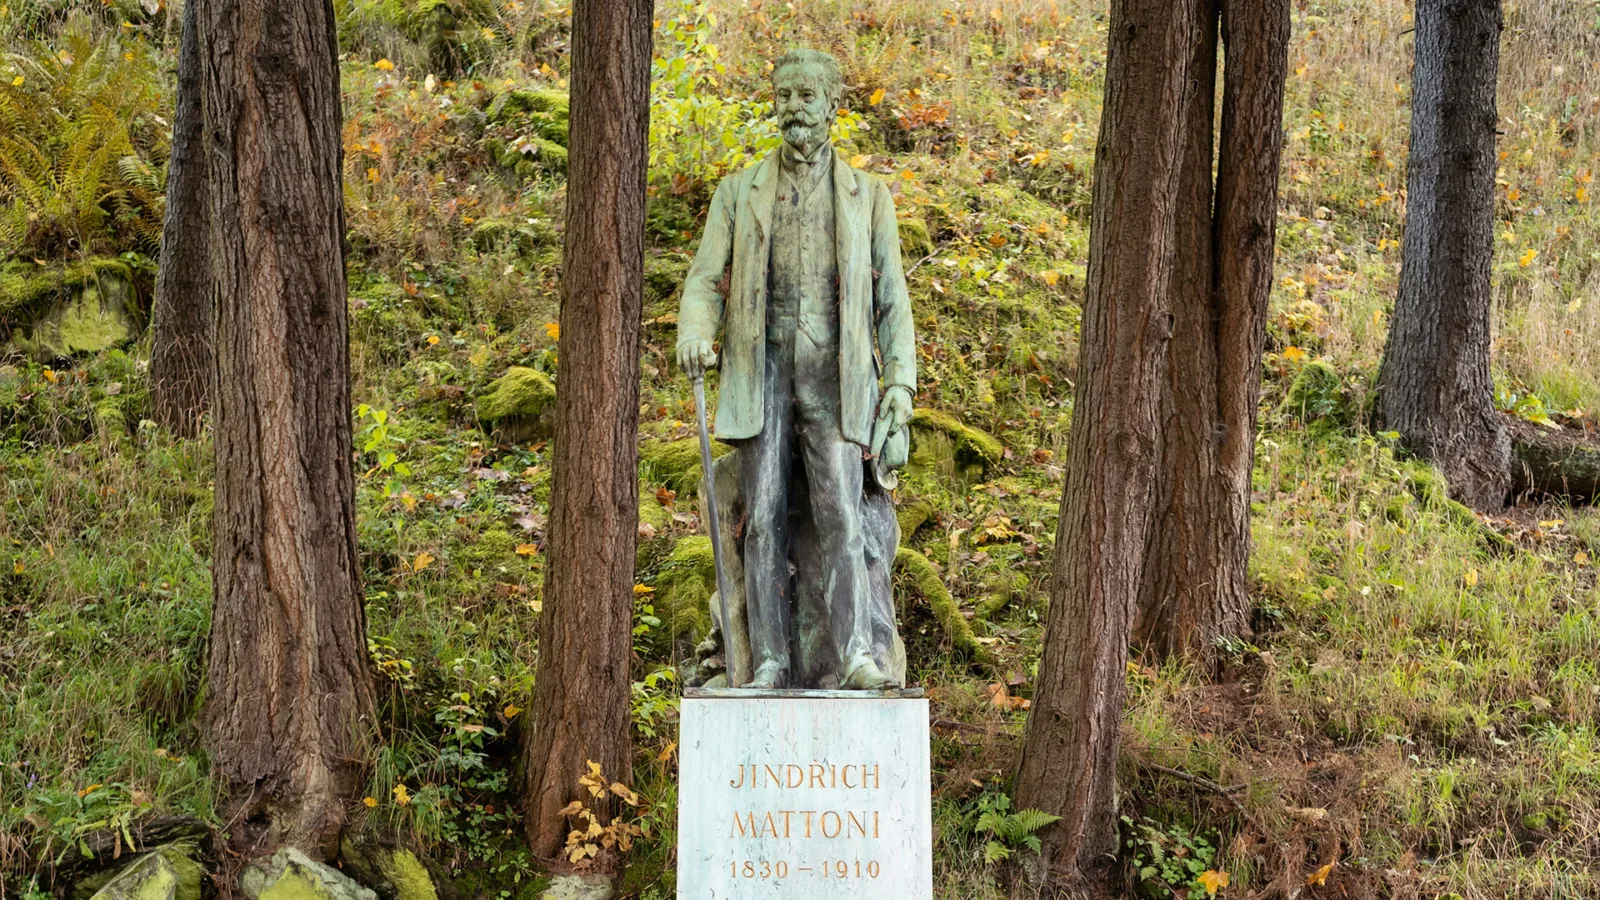 a statue of a man in a forest